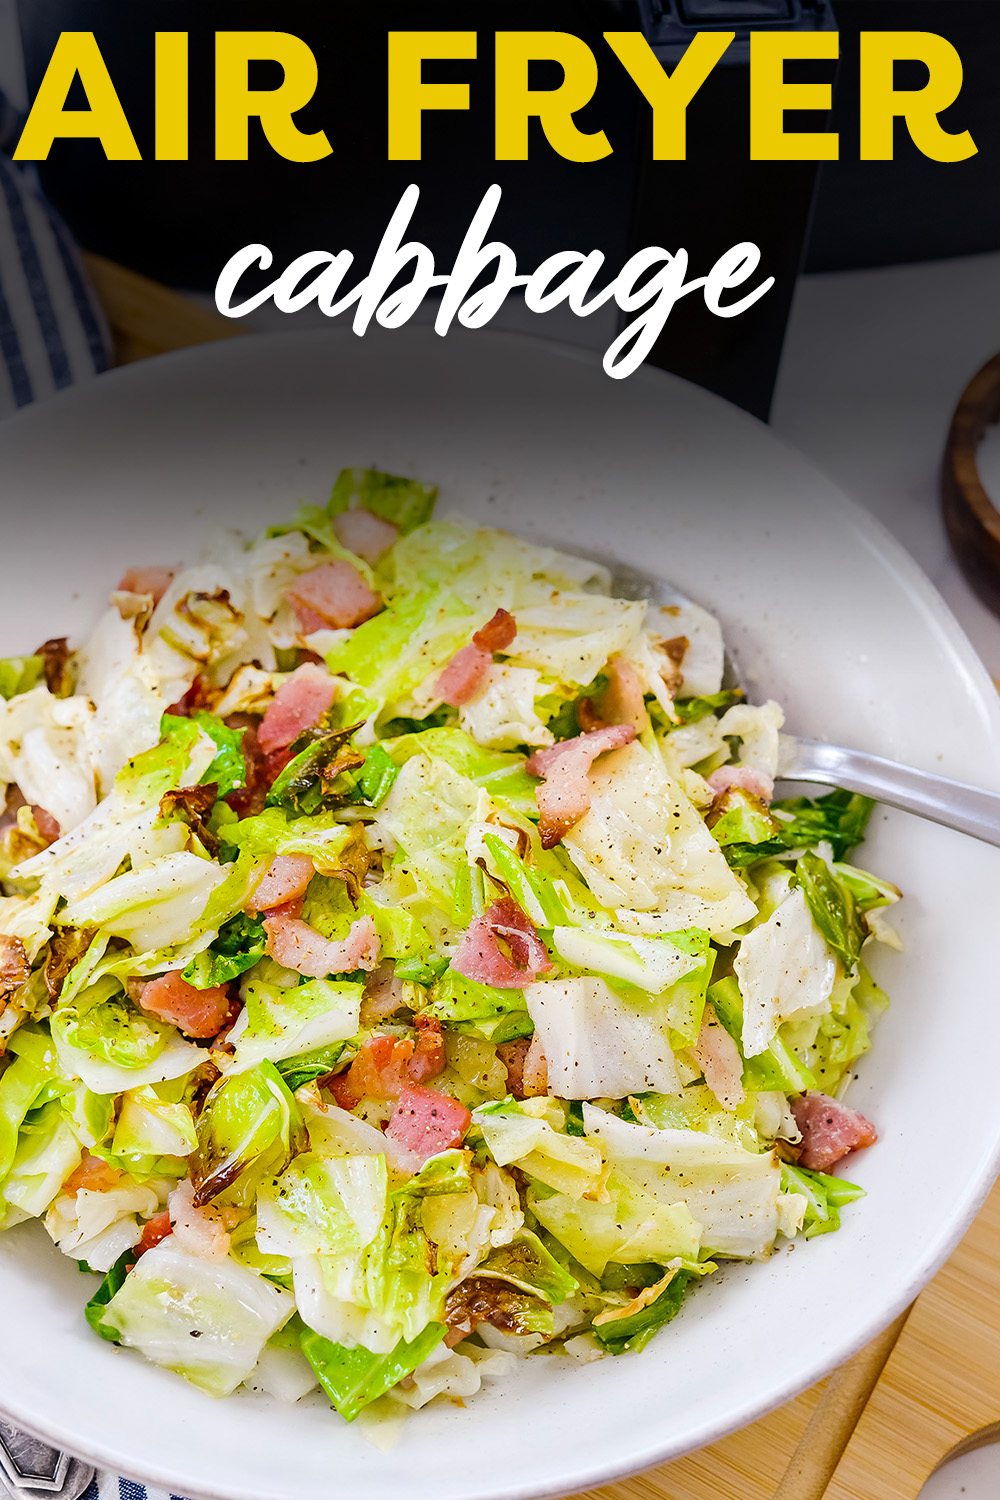 Air fryer fried cabbage is the best way to mix cabbage and bacon together!  The ease, texture, and taste is the BEST!